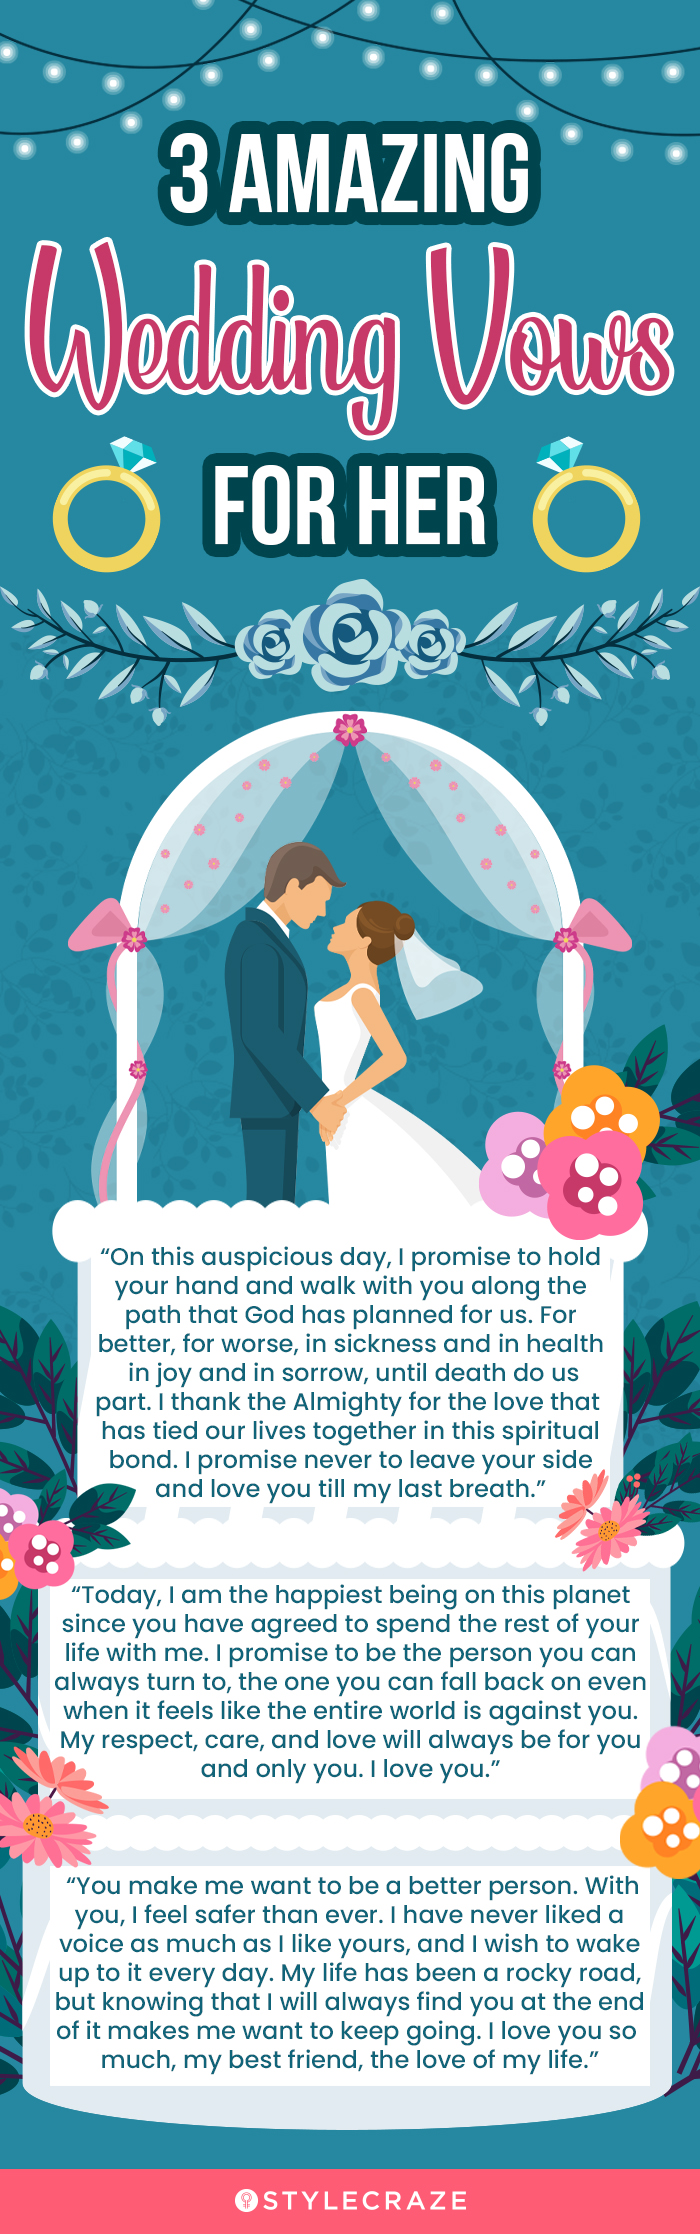 3 amazing wedding vows for her (infographic)